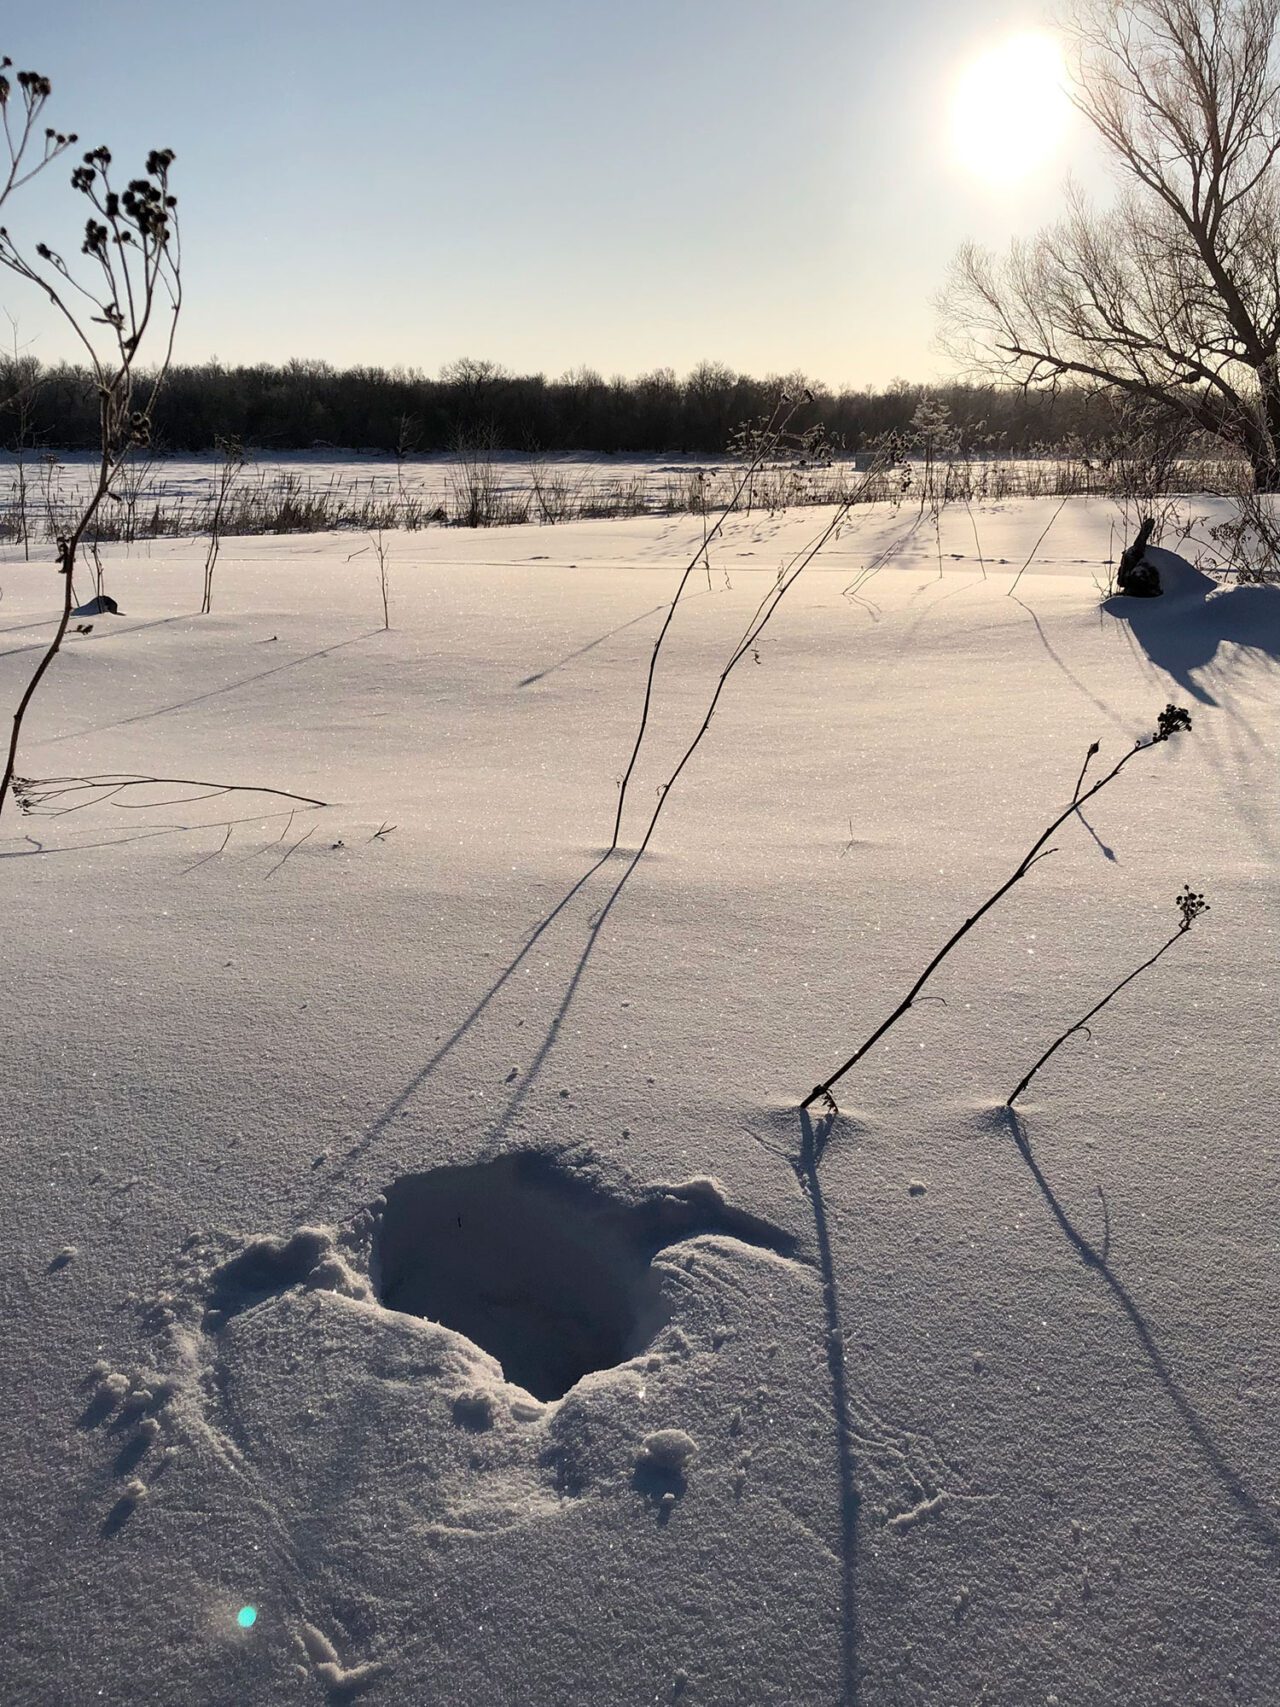 A snowy field in the evening light with a hole in the snow